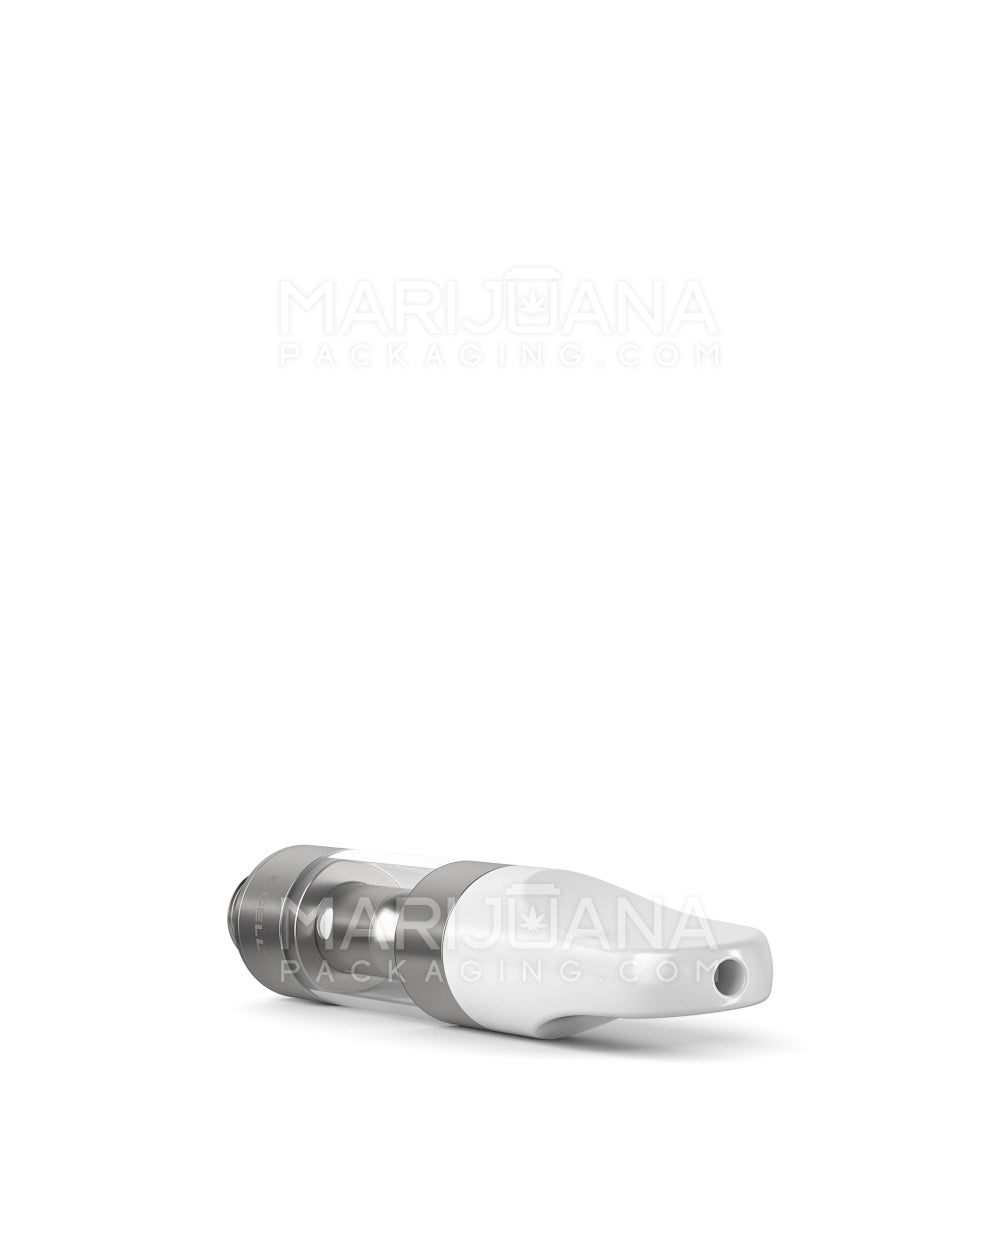 CCELL | Plastic Vape Cartridge with White Plastic Mouthpiece | 0.5mL - Press On - 100 Count - 6